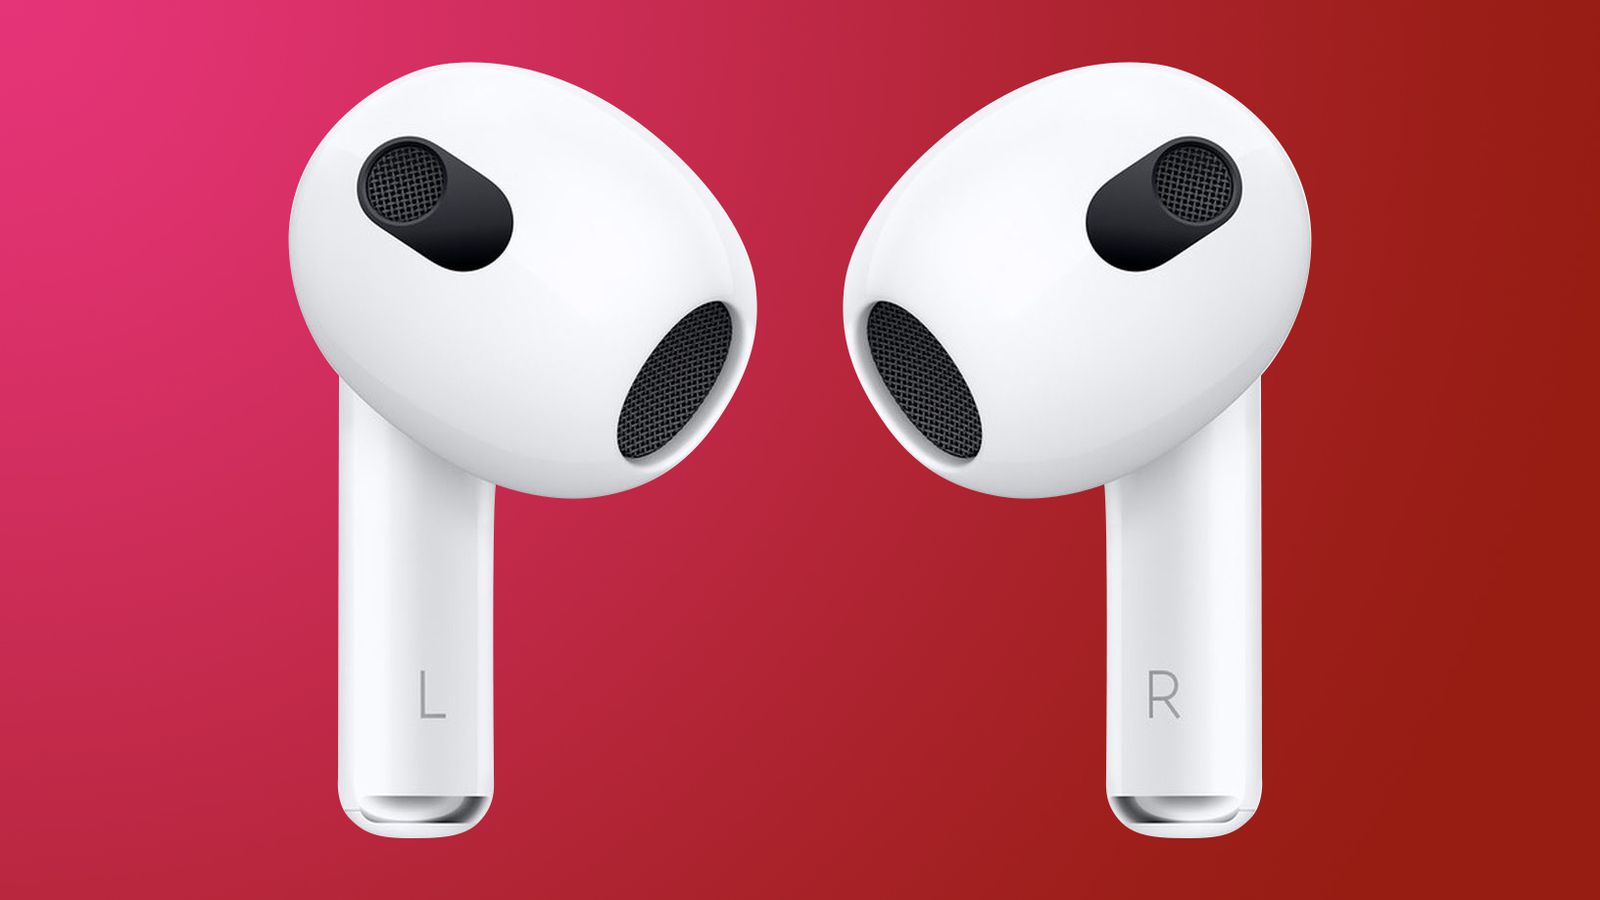 AirPods Hurt Your Here Are Some Fit Tips Alternative Earbud Options - MacRumors